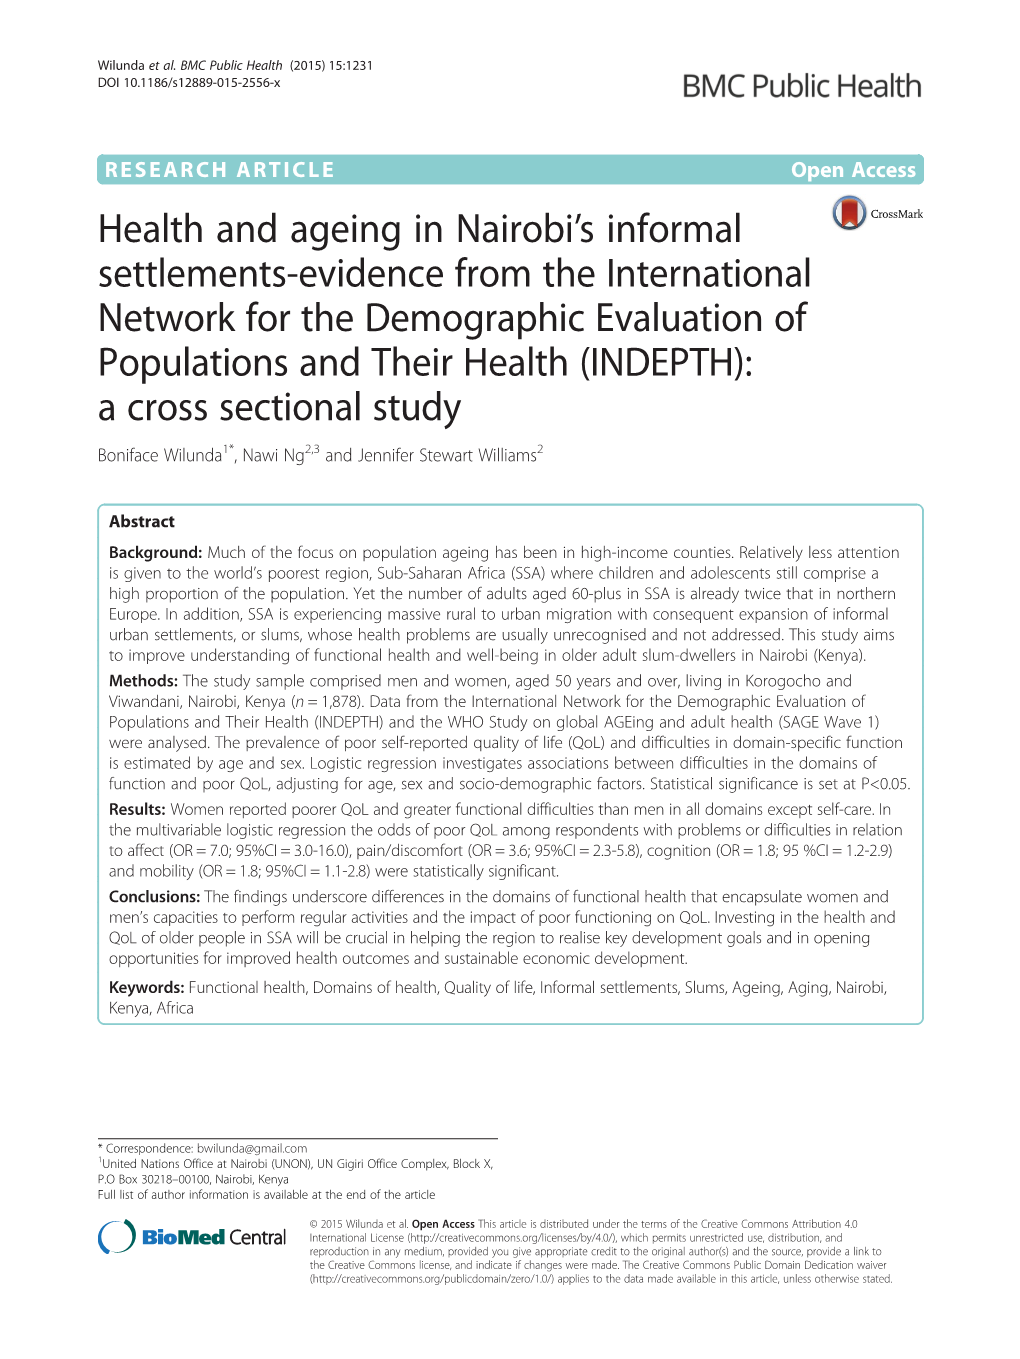 Health and Ageing in Nairobi's Informal Settlements-Evidence From